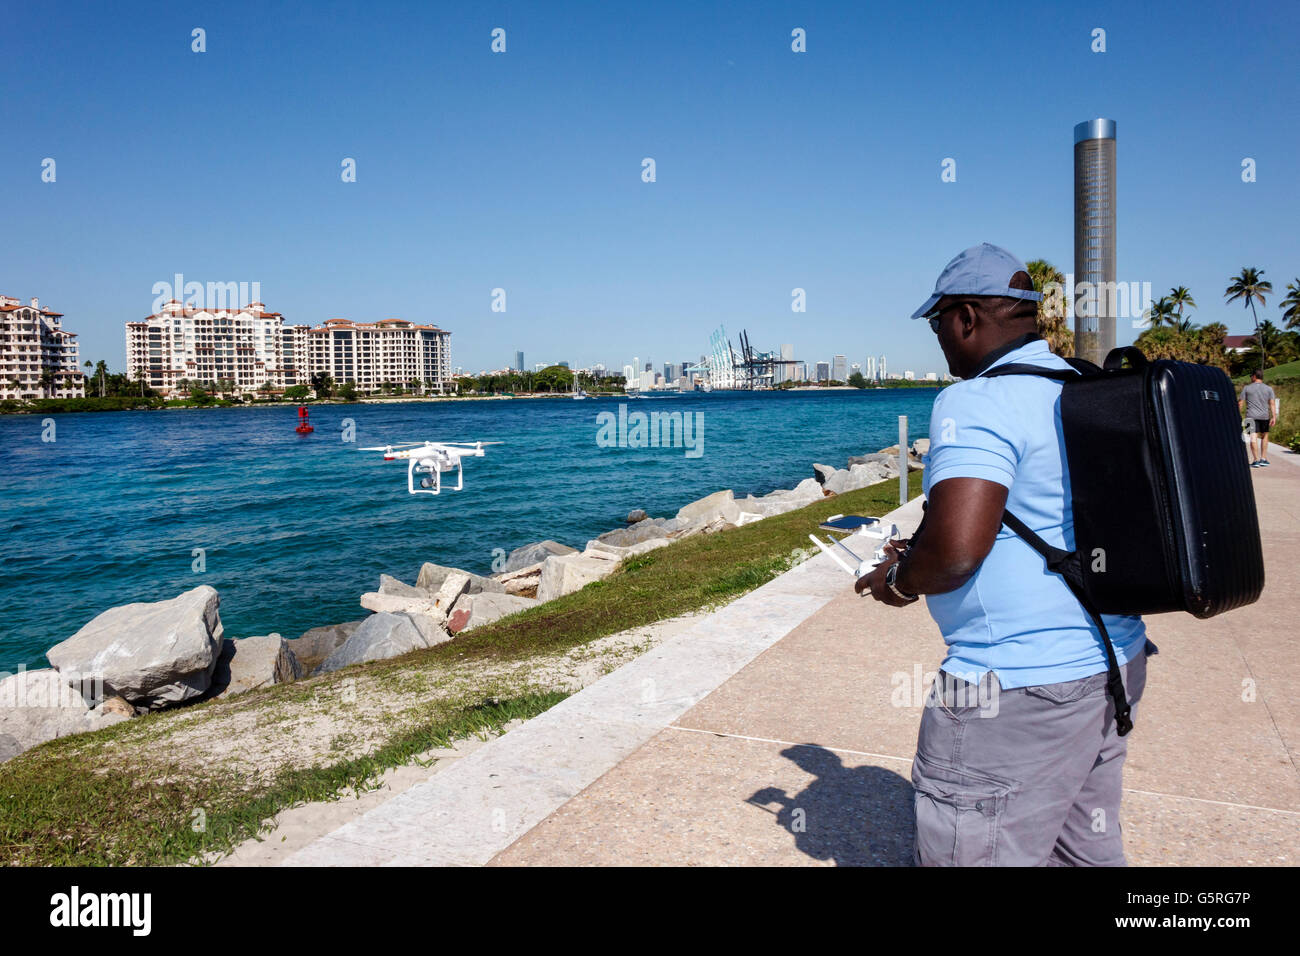 Miami Beach Florida,South Pointe Park,Government Cut,Biscayne Bay,Black adult,adults,man men maschio,working work worker worker,employees,NOAA,Sout Foto Stock